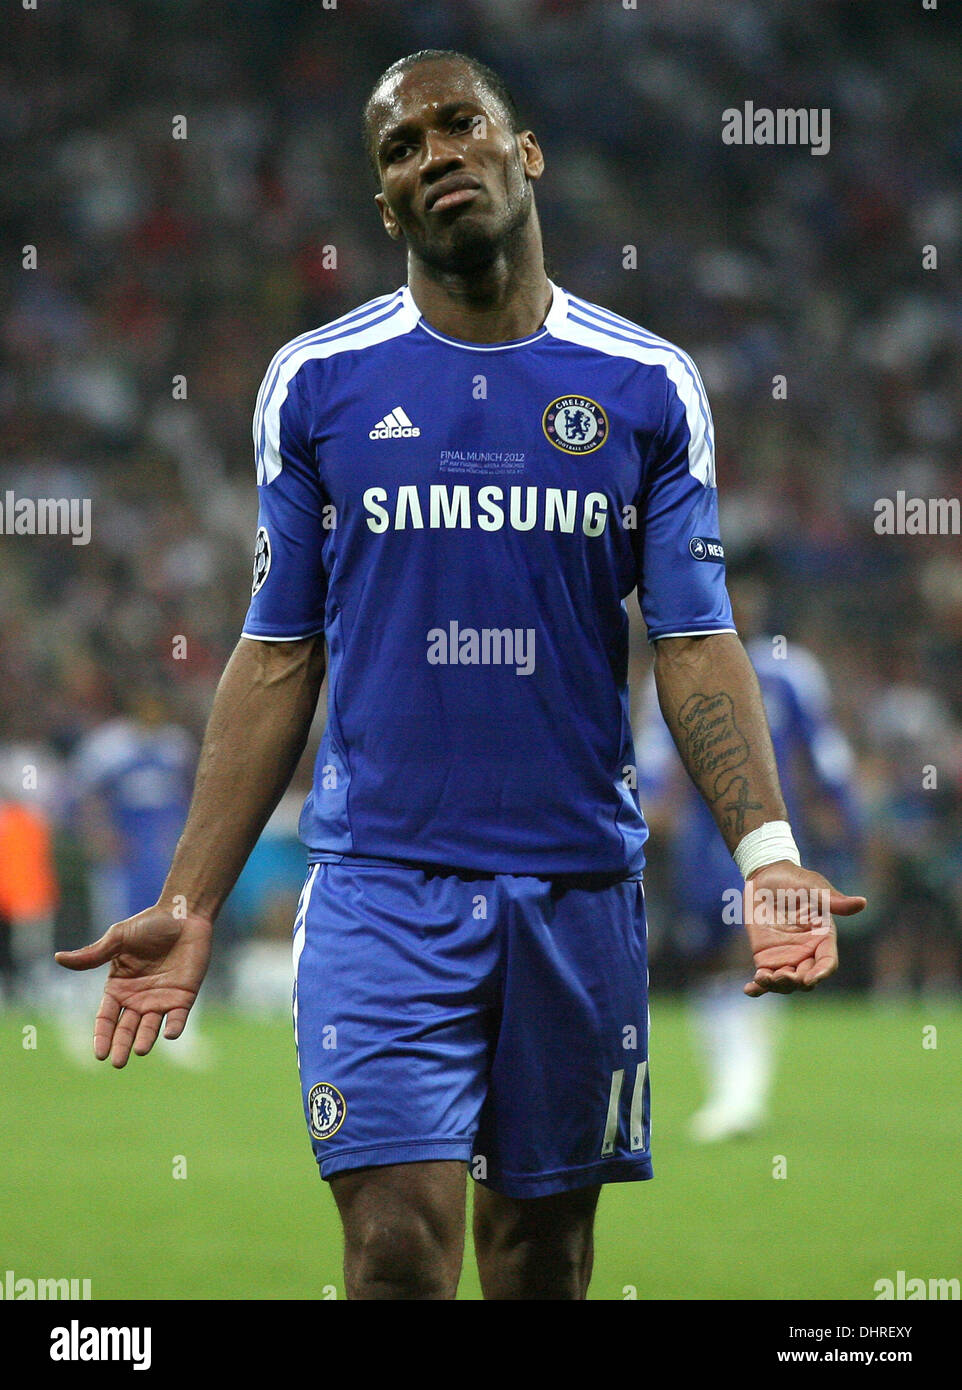 Didier Drogba The UEFA Champions League final match between Chelsea and Bayern Munich at the Allianz Arena Munich, Germany - 19.05.12 Photo - Alamy